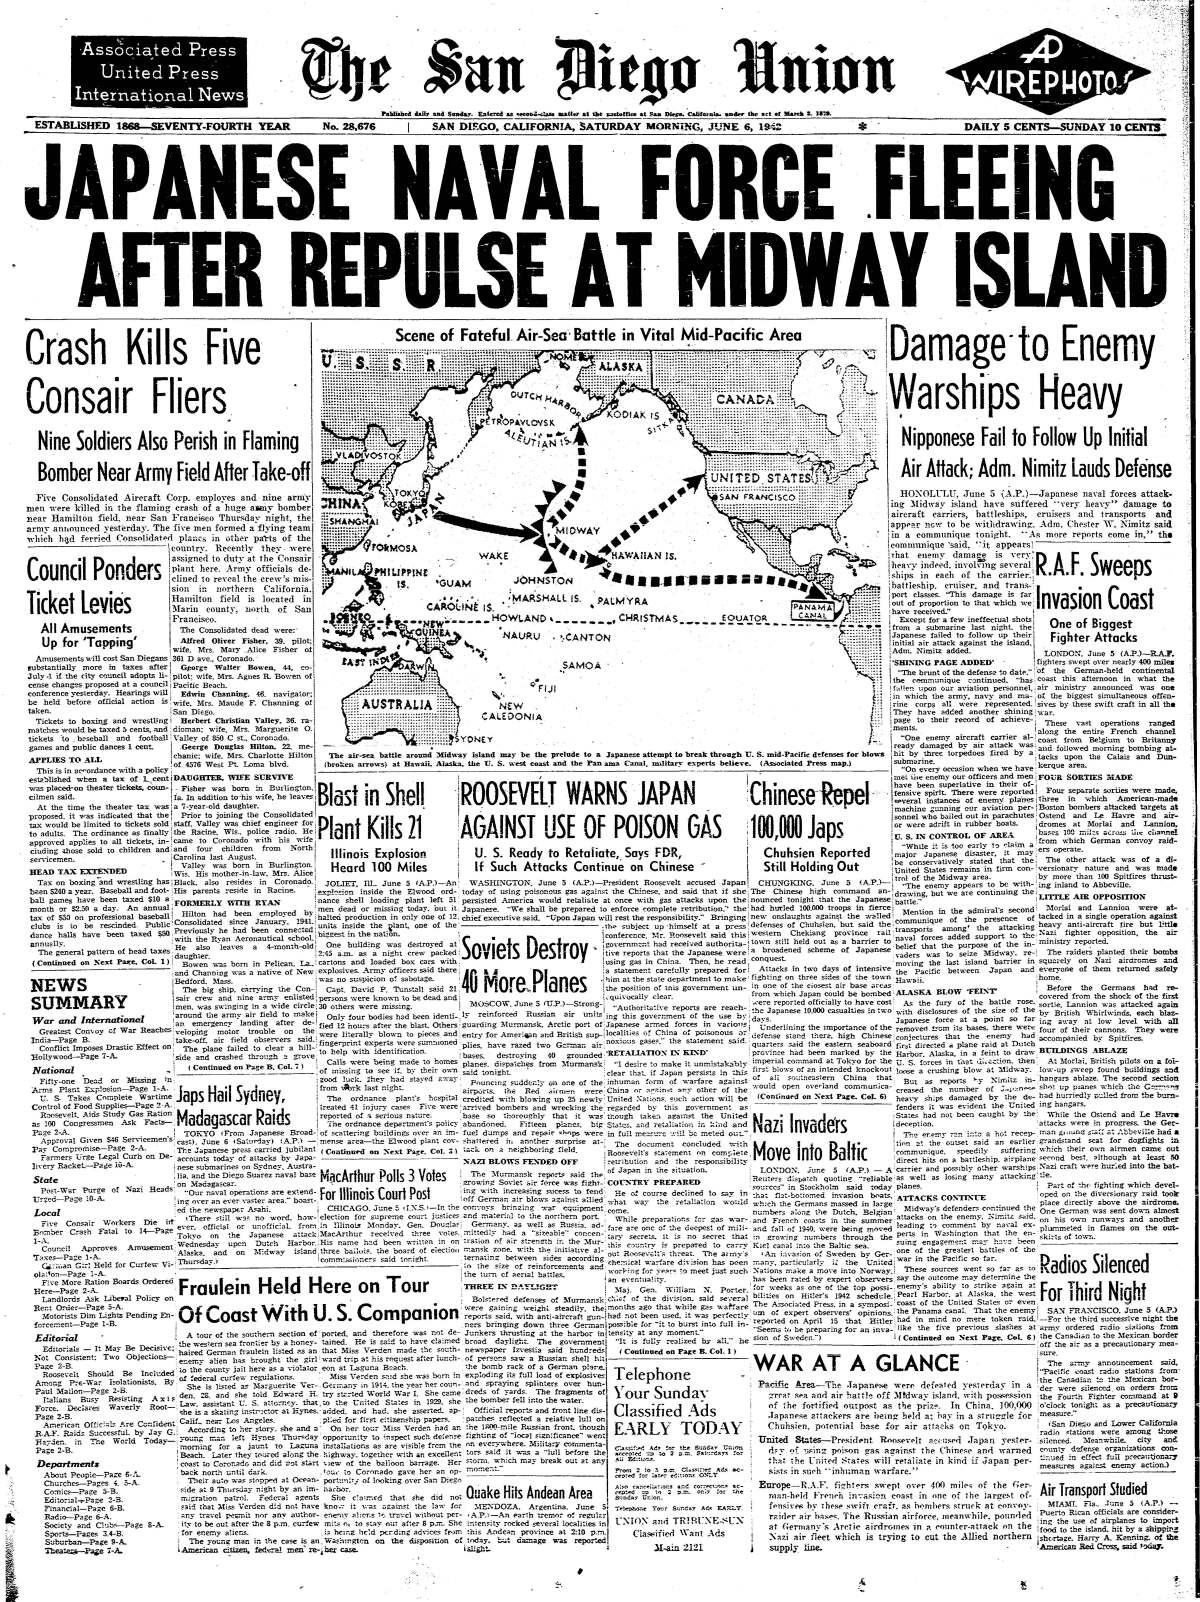 The front page of The San Diego Union, Saturday, June 6, 1952.